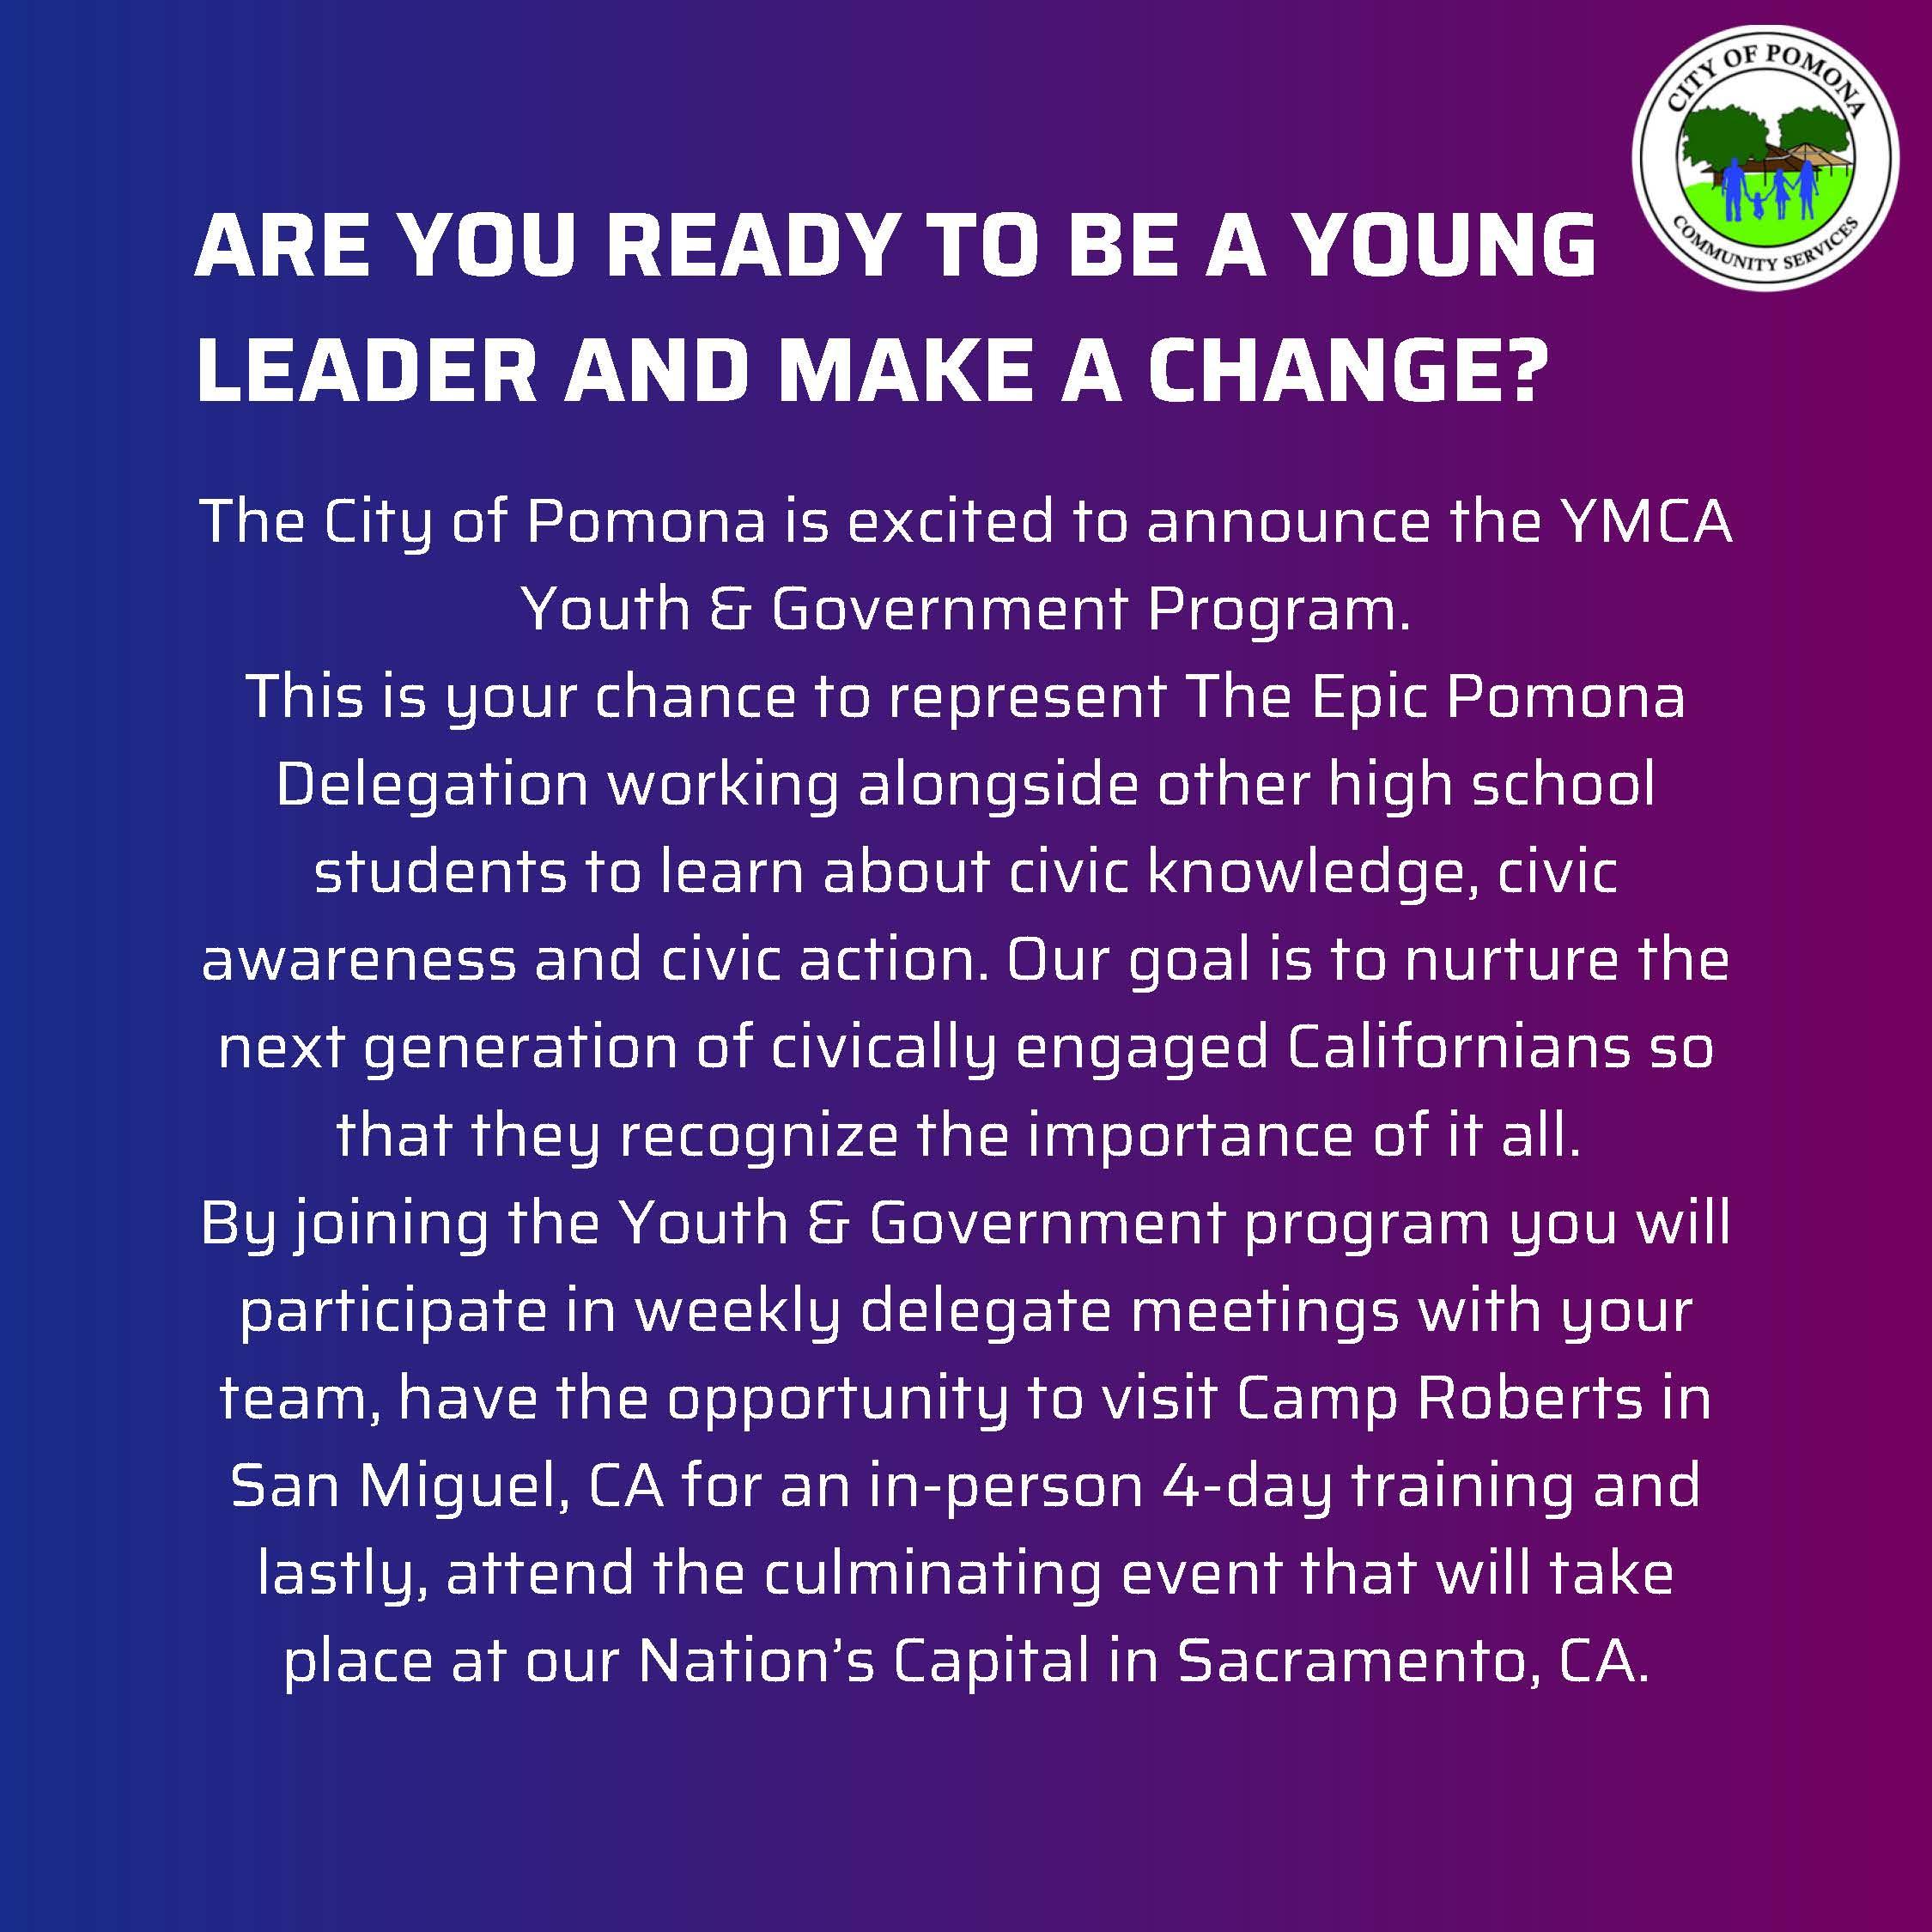 California Youth & Government Image for Web